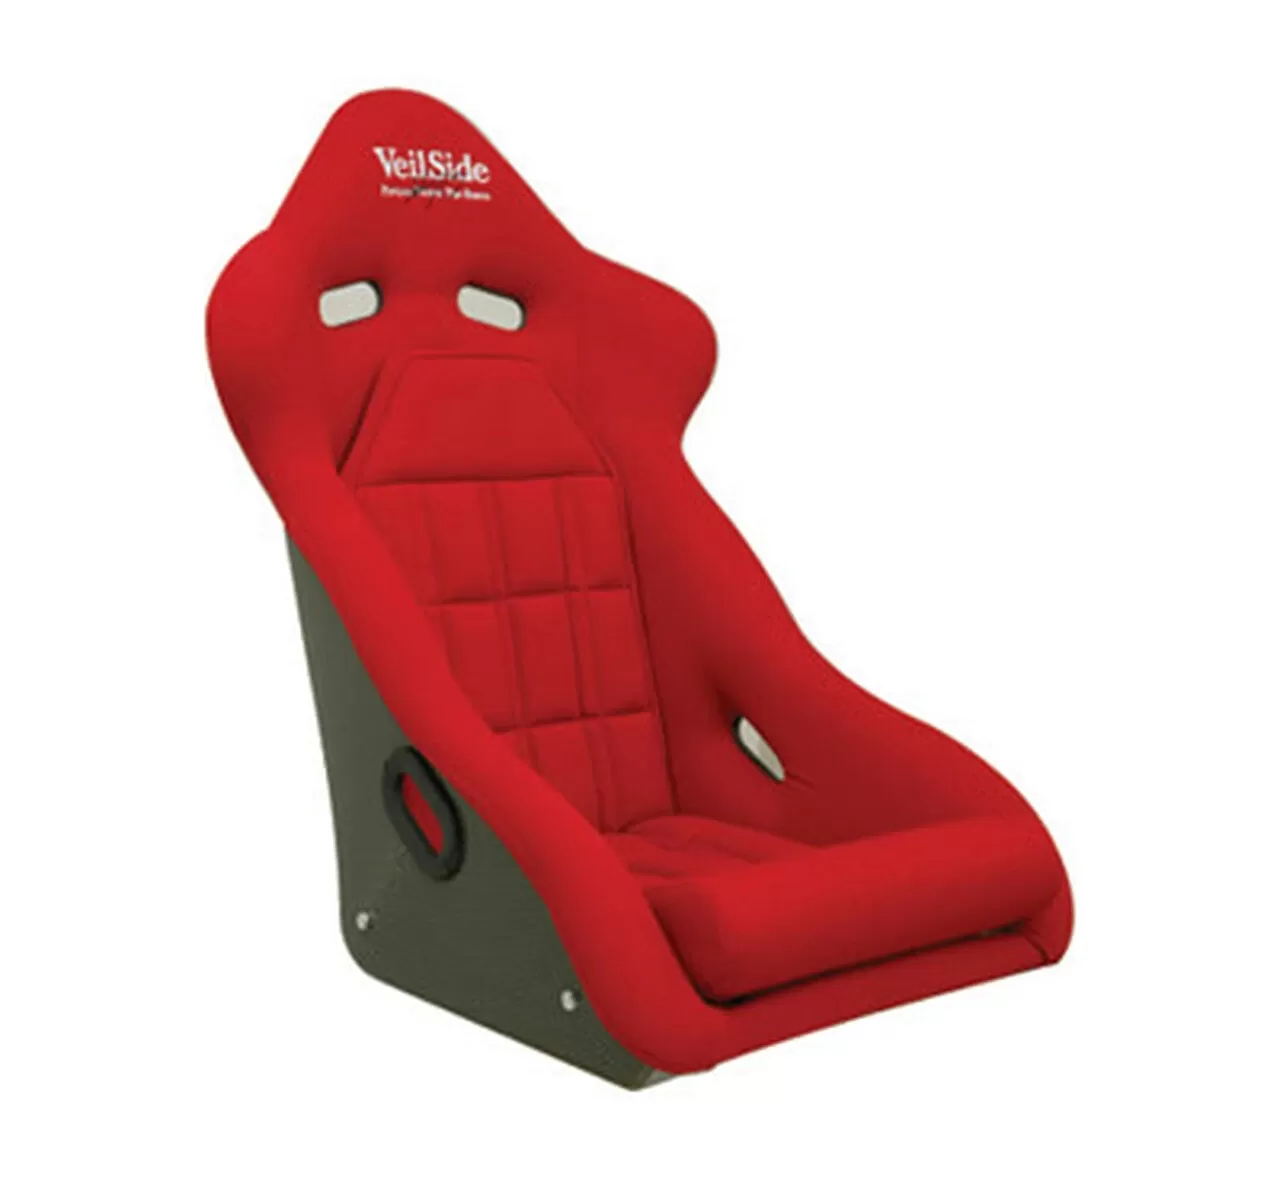 VeilSide D-1R Carbon Racing Seat Red/Red - FA010-03REDC